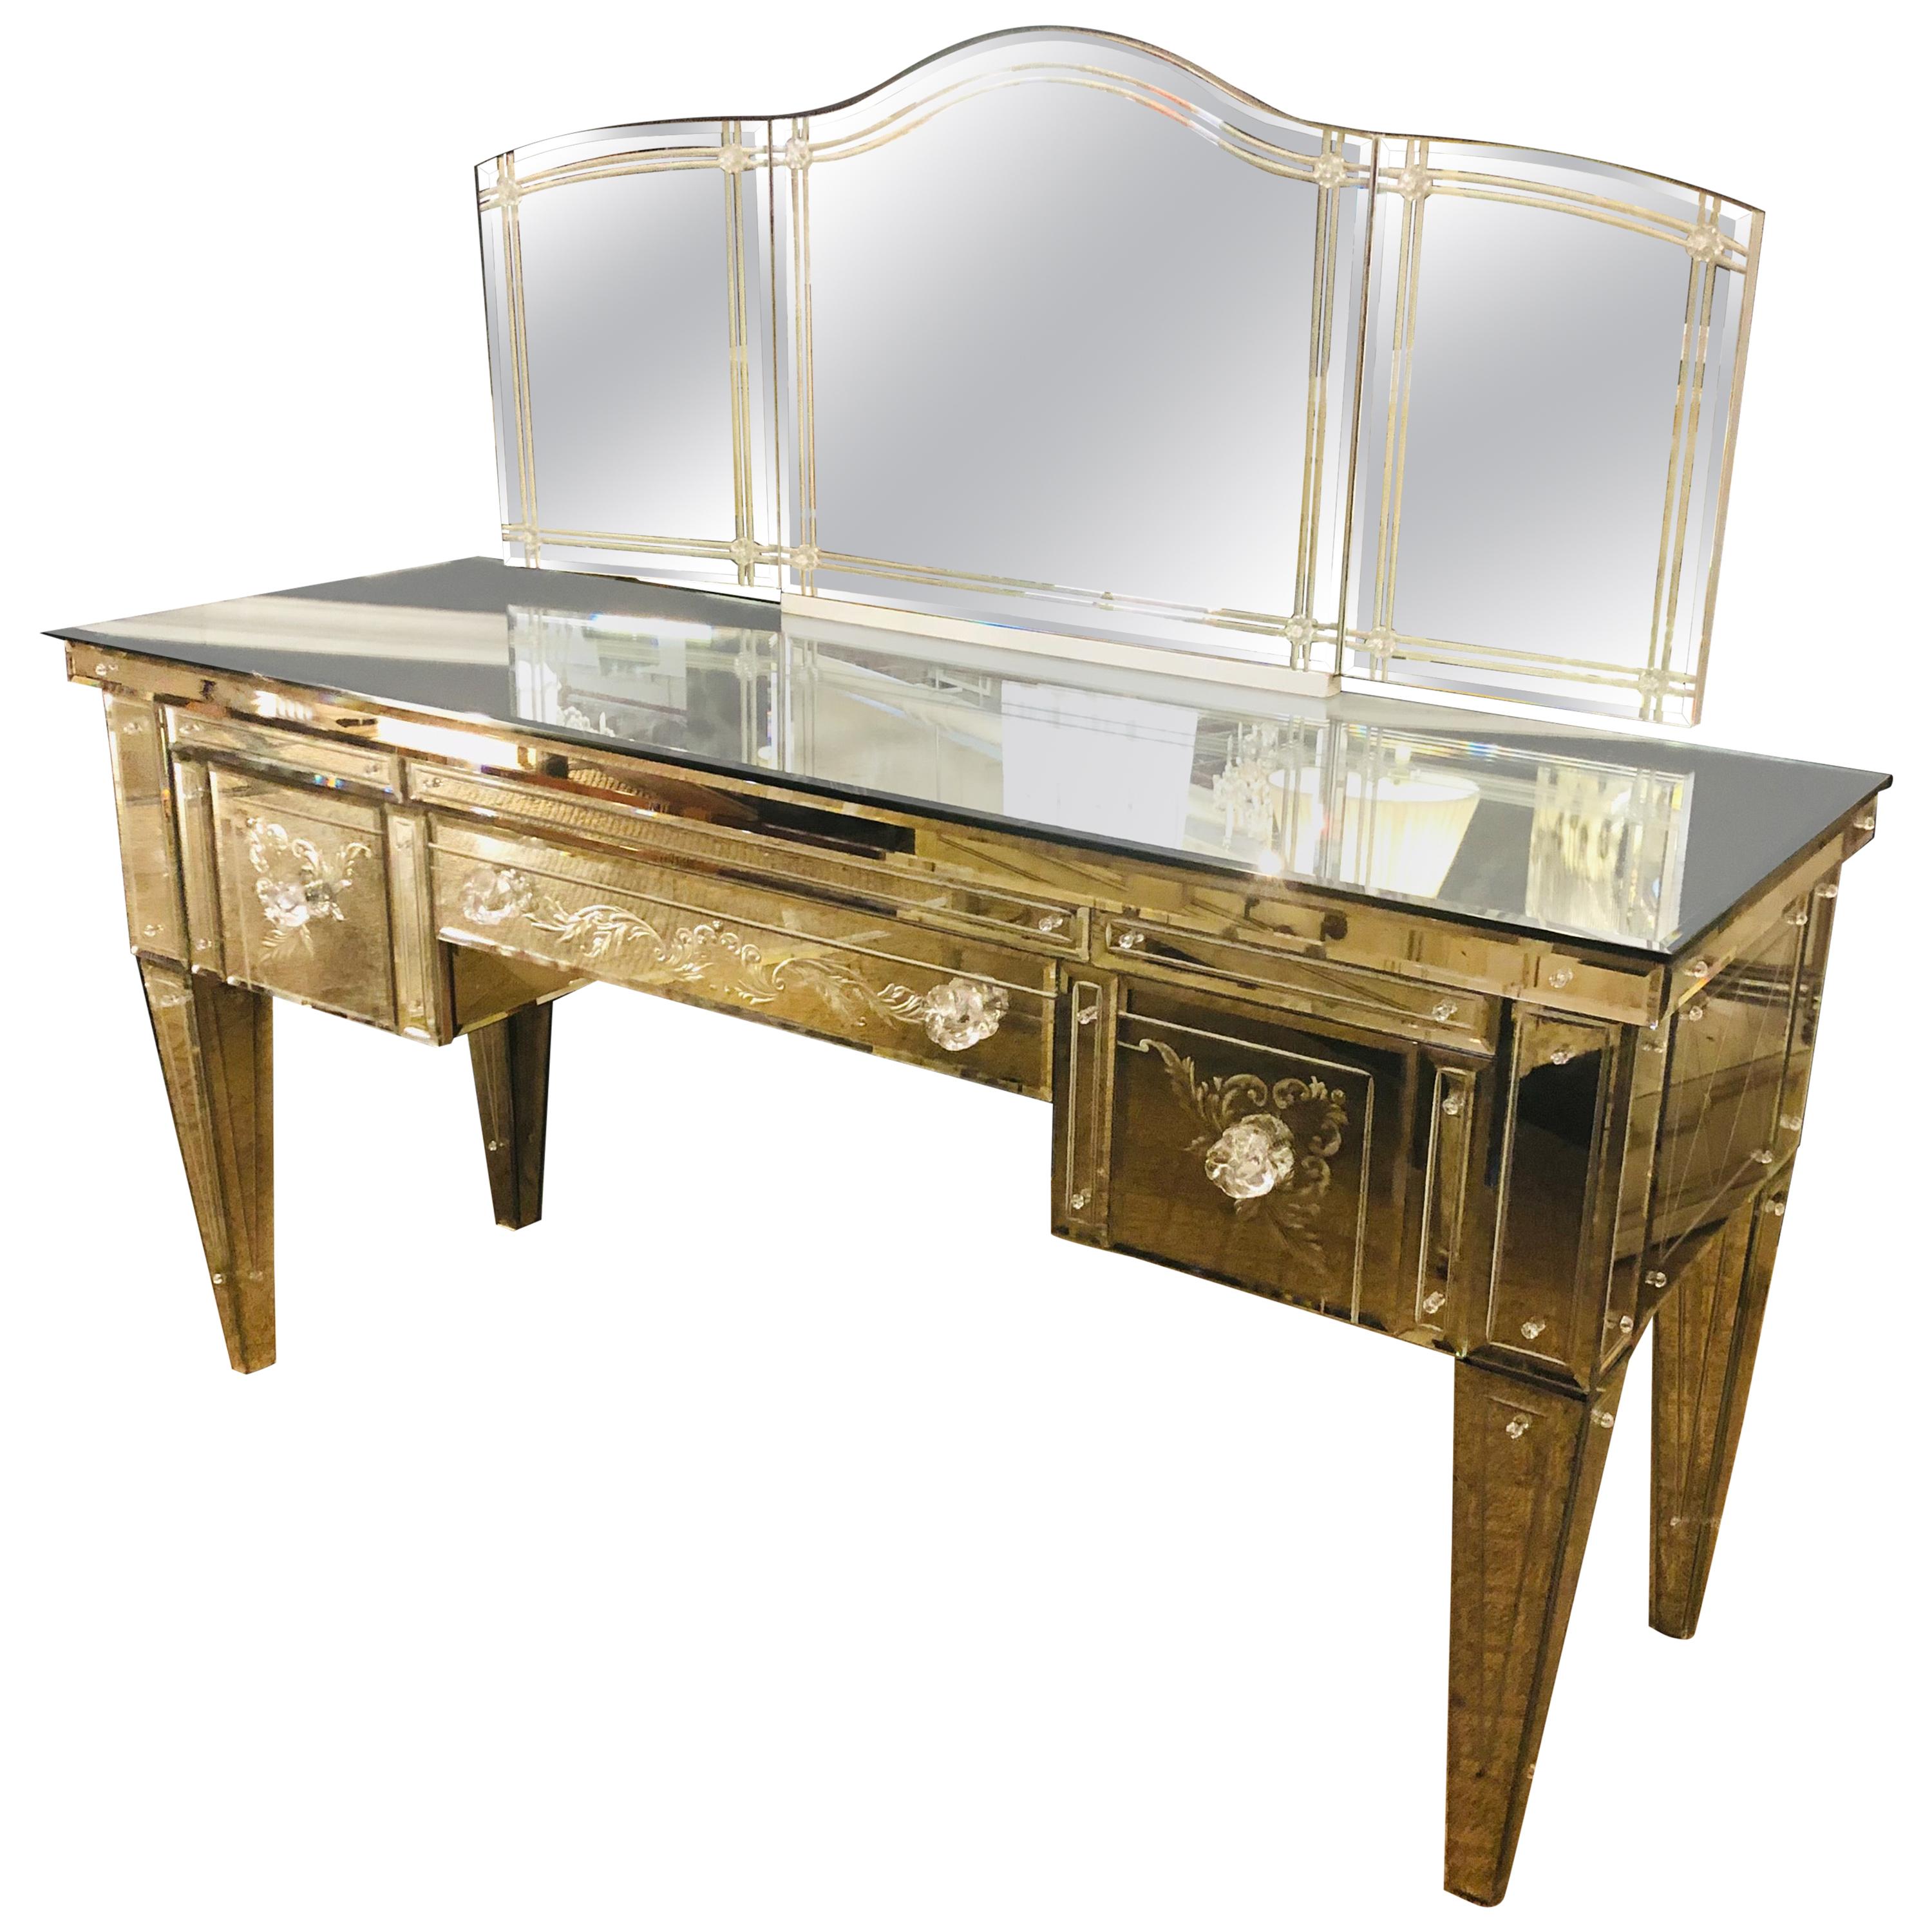 Custom Beveled and Etched Glass Mirrored Vanity Desk with Attached Mirror